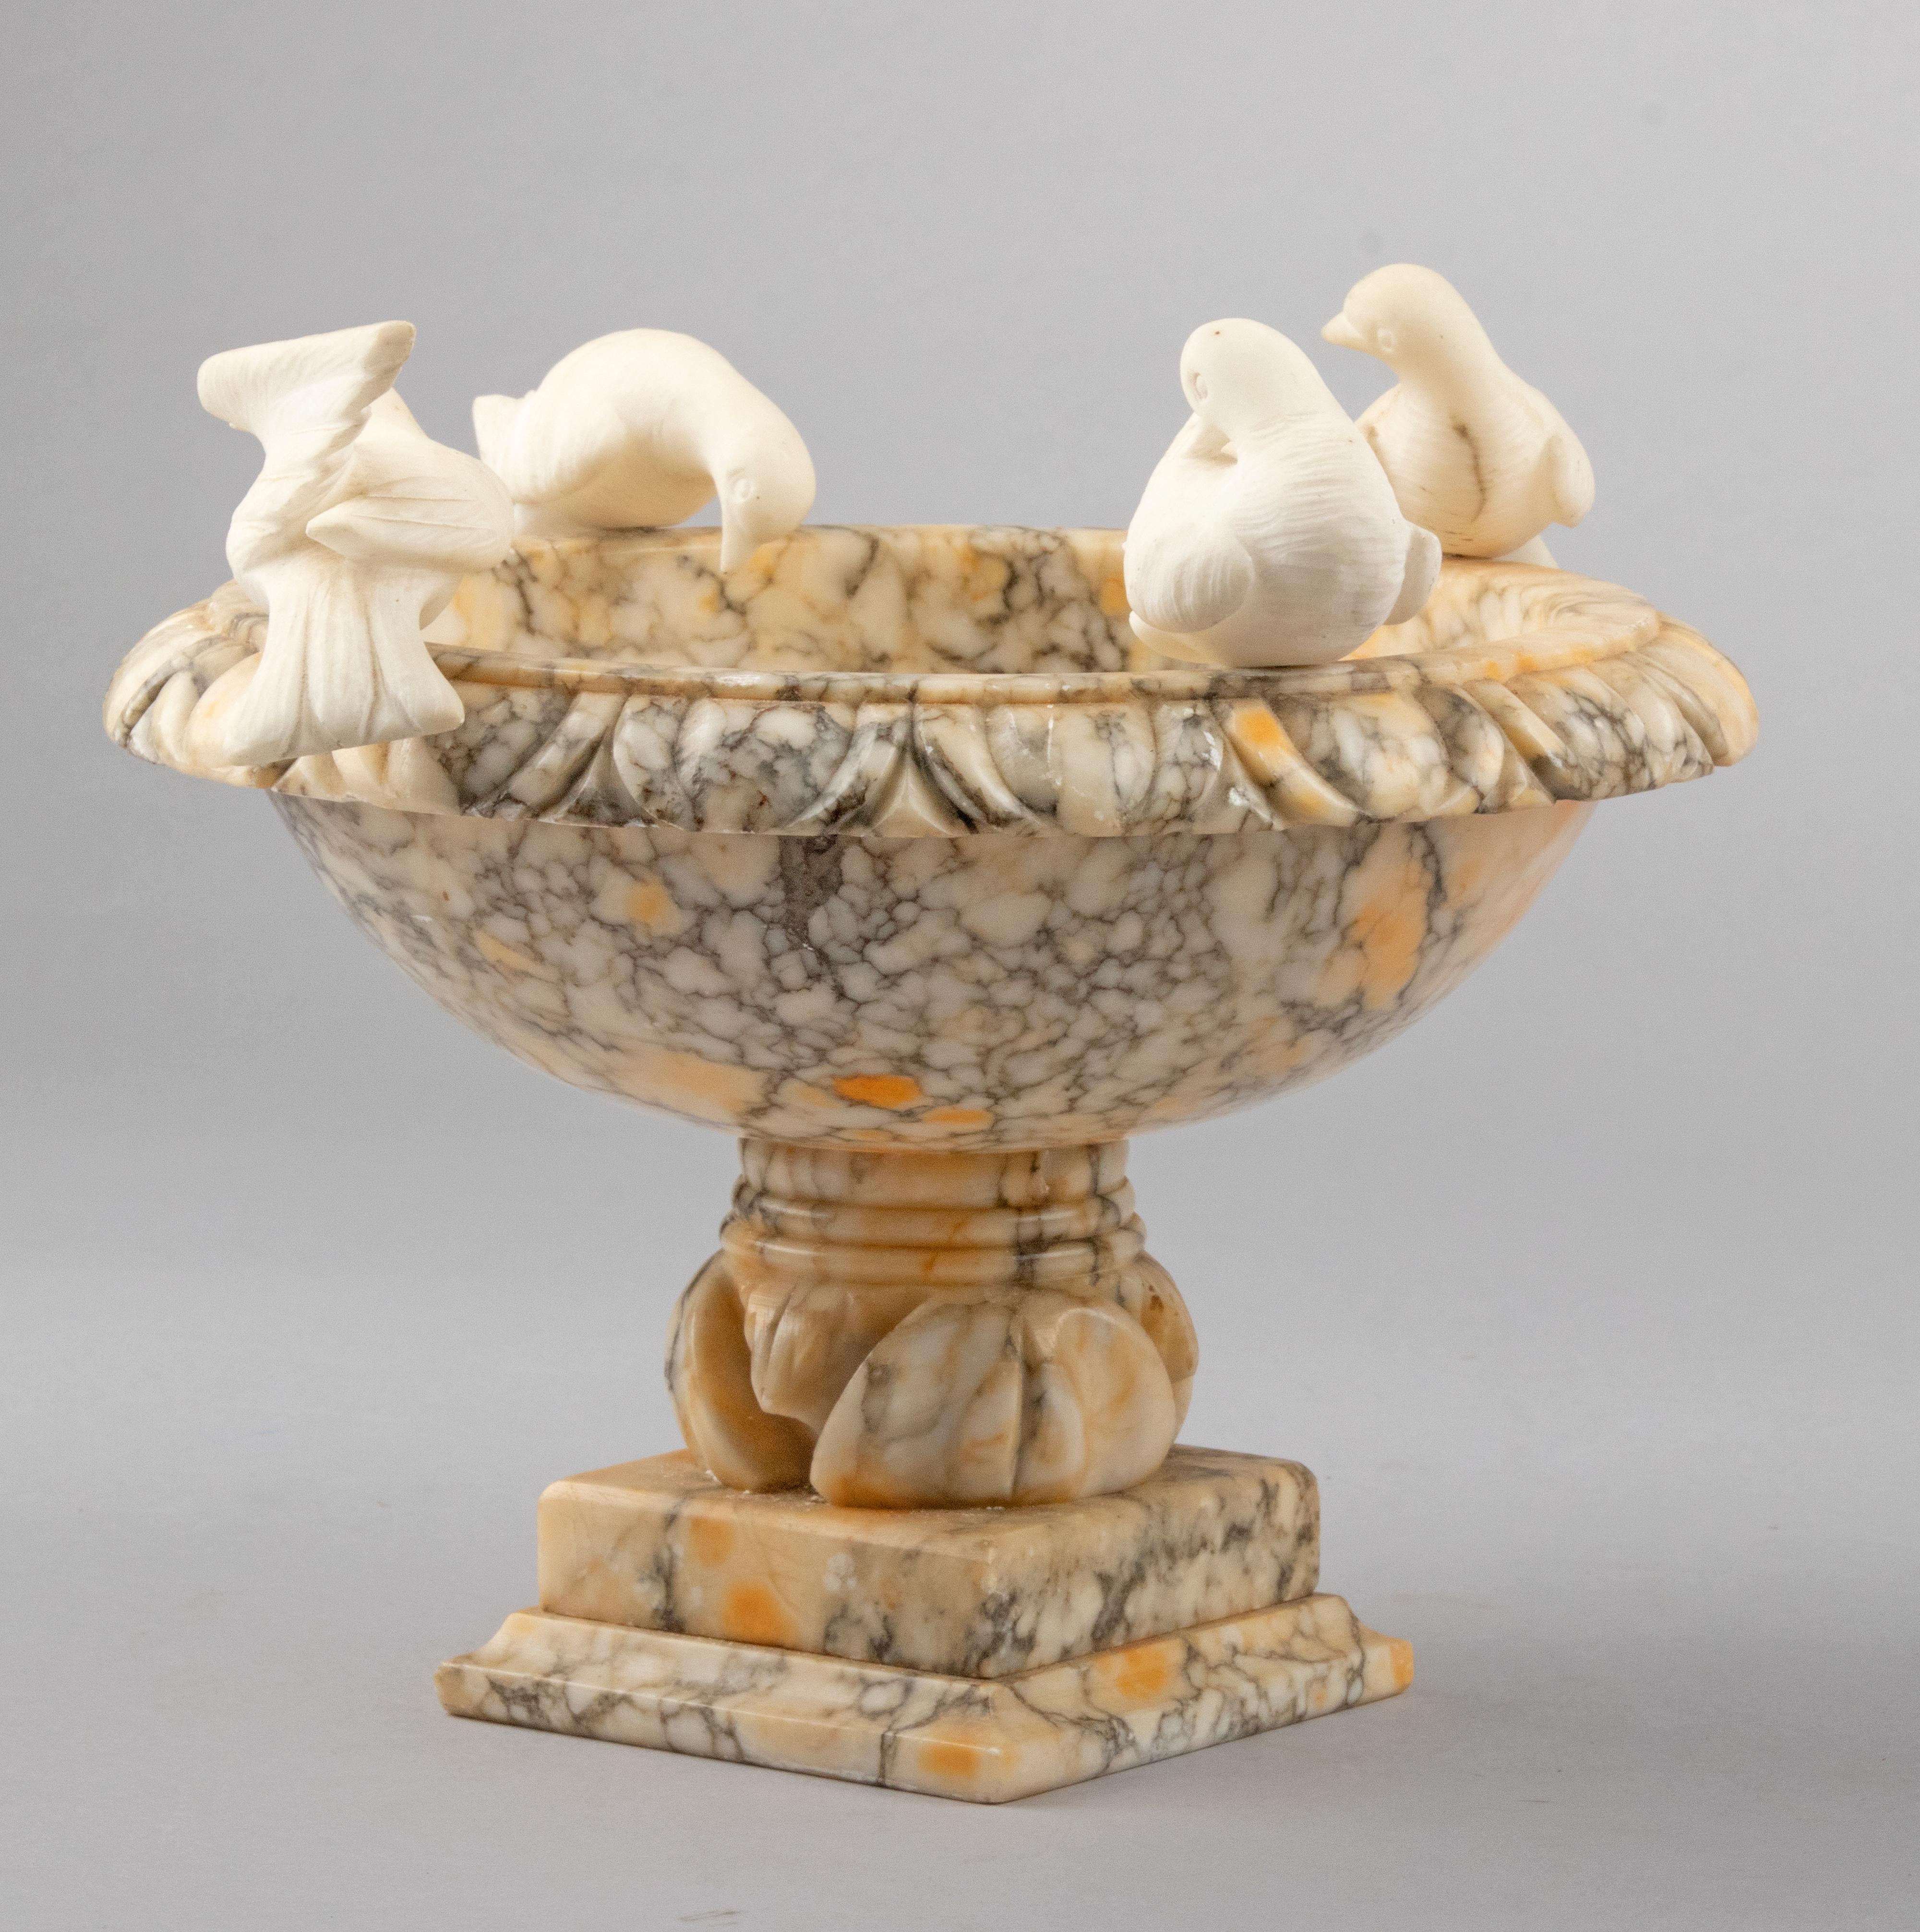 Decorative bowl, made of marble. There are birds on the edge, these are made of alabaster. This decorative bowl can also be used as a bird bath in the garden.